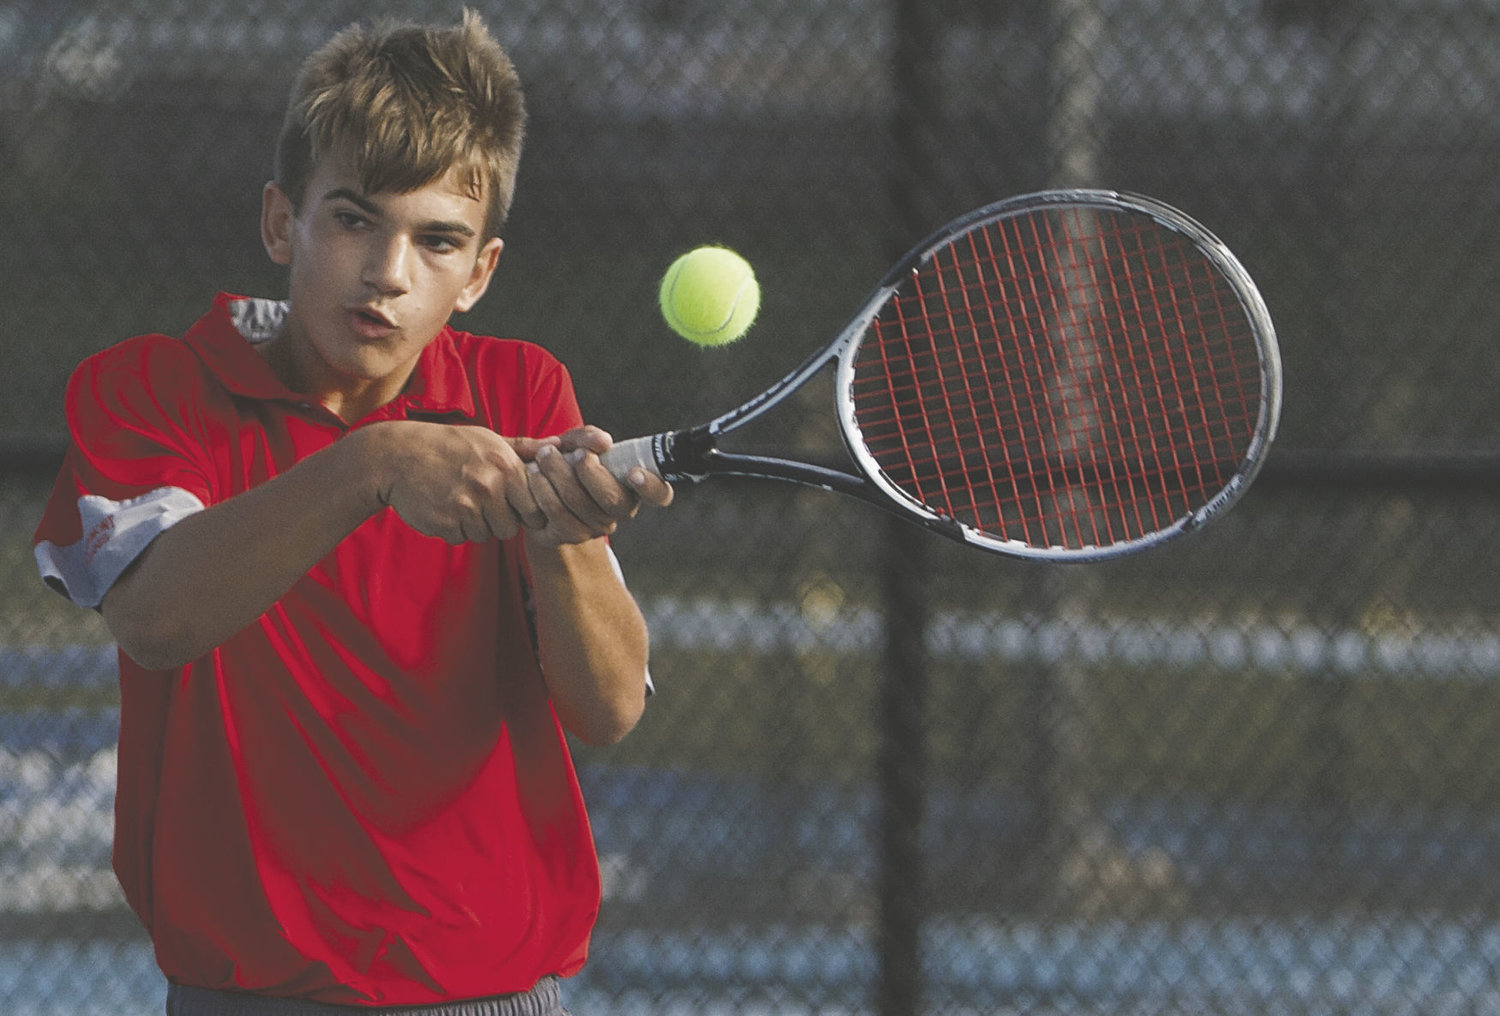 Southmont's Adam Cox helped lead the way to a sectional title with a win at No. 1 singles.